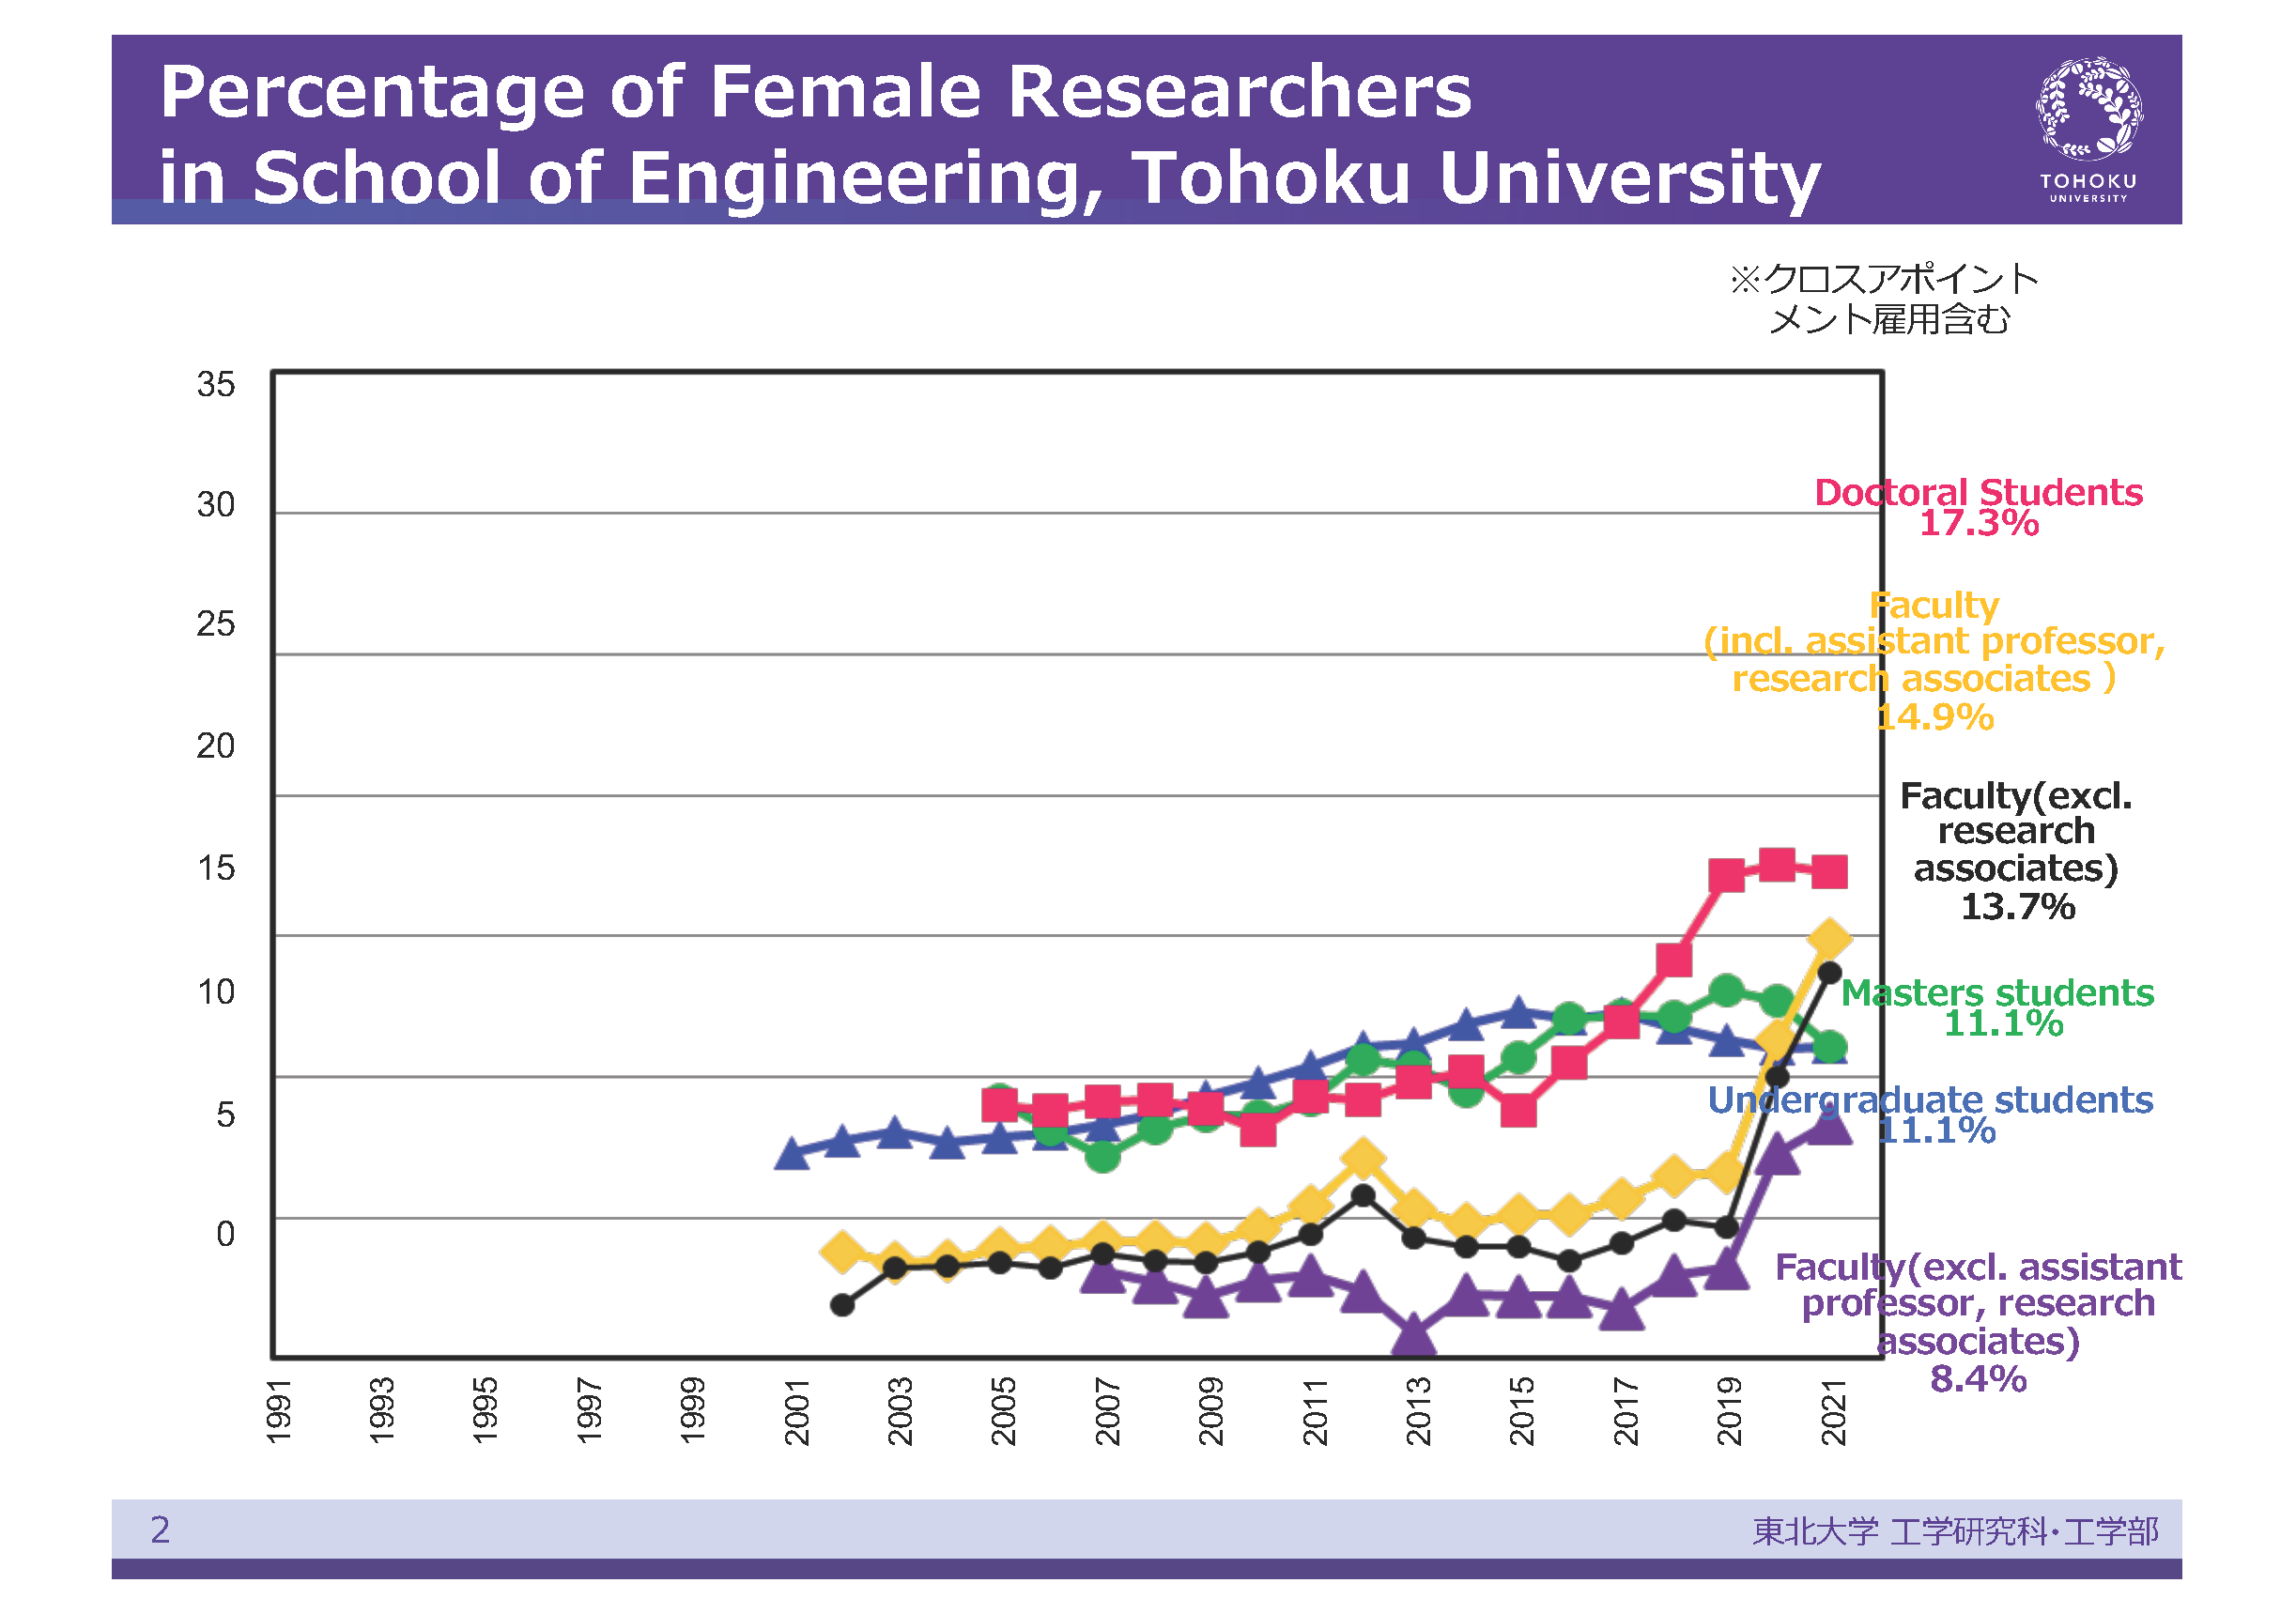 Transition of percentage of Female Researchers and students in School of Engineering, Tohoku University